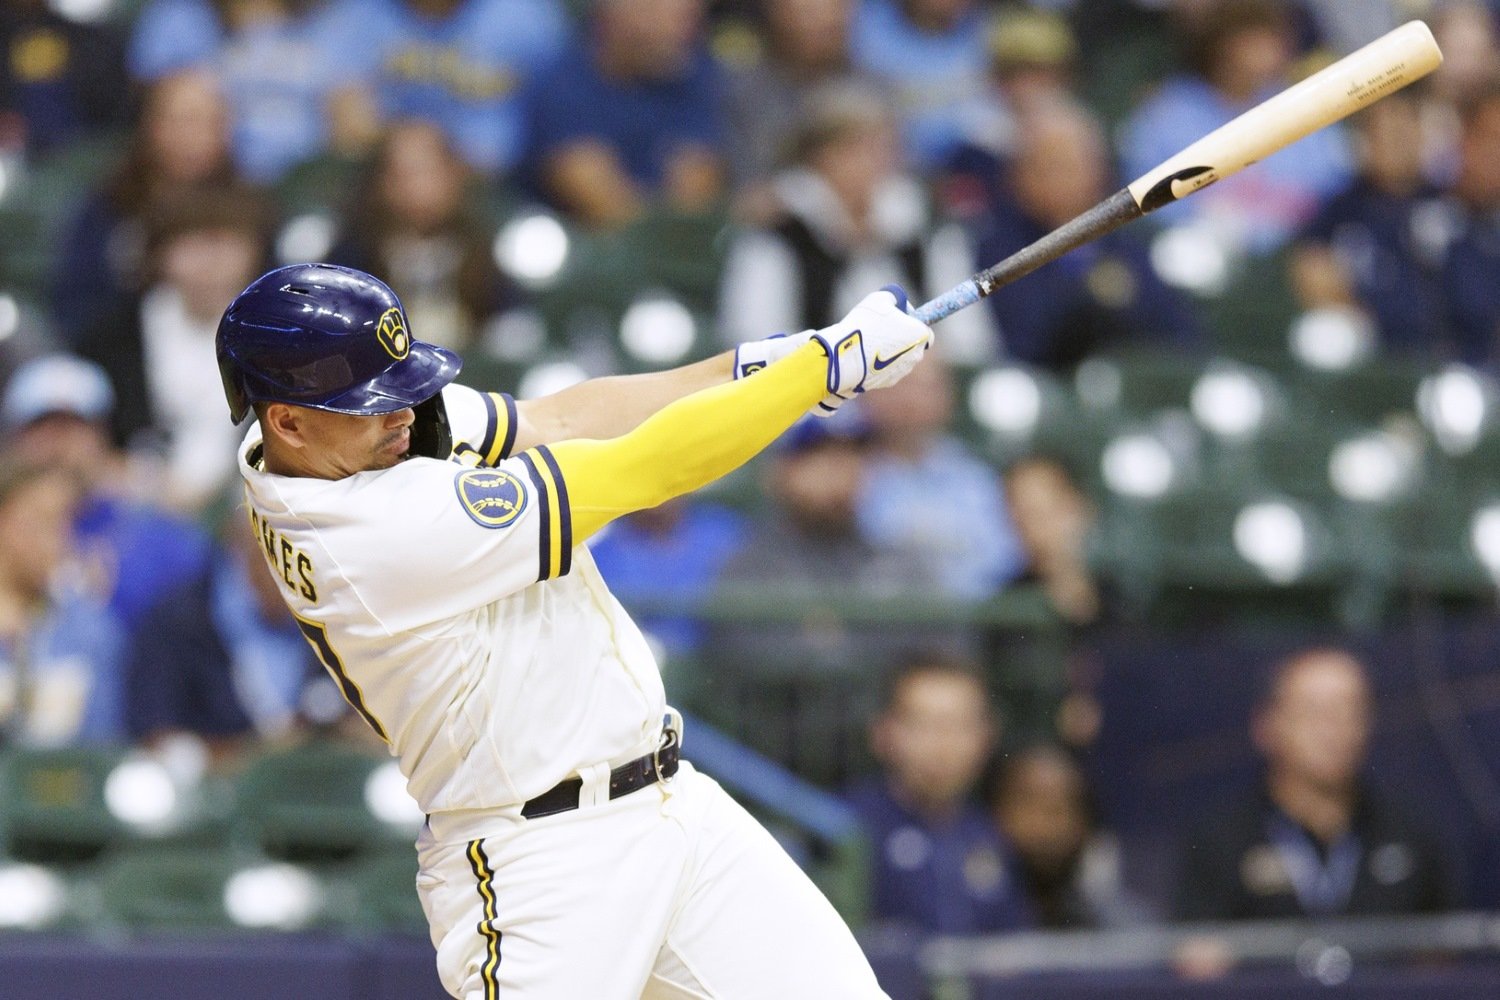 Adames hopes to remain with Brewers long term: 'I love playing here